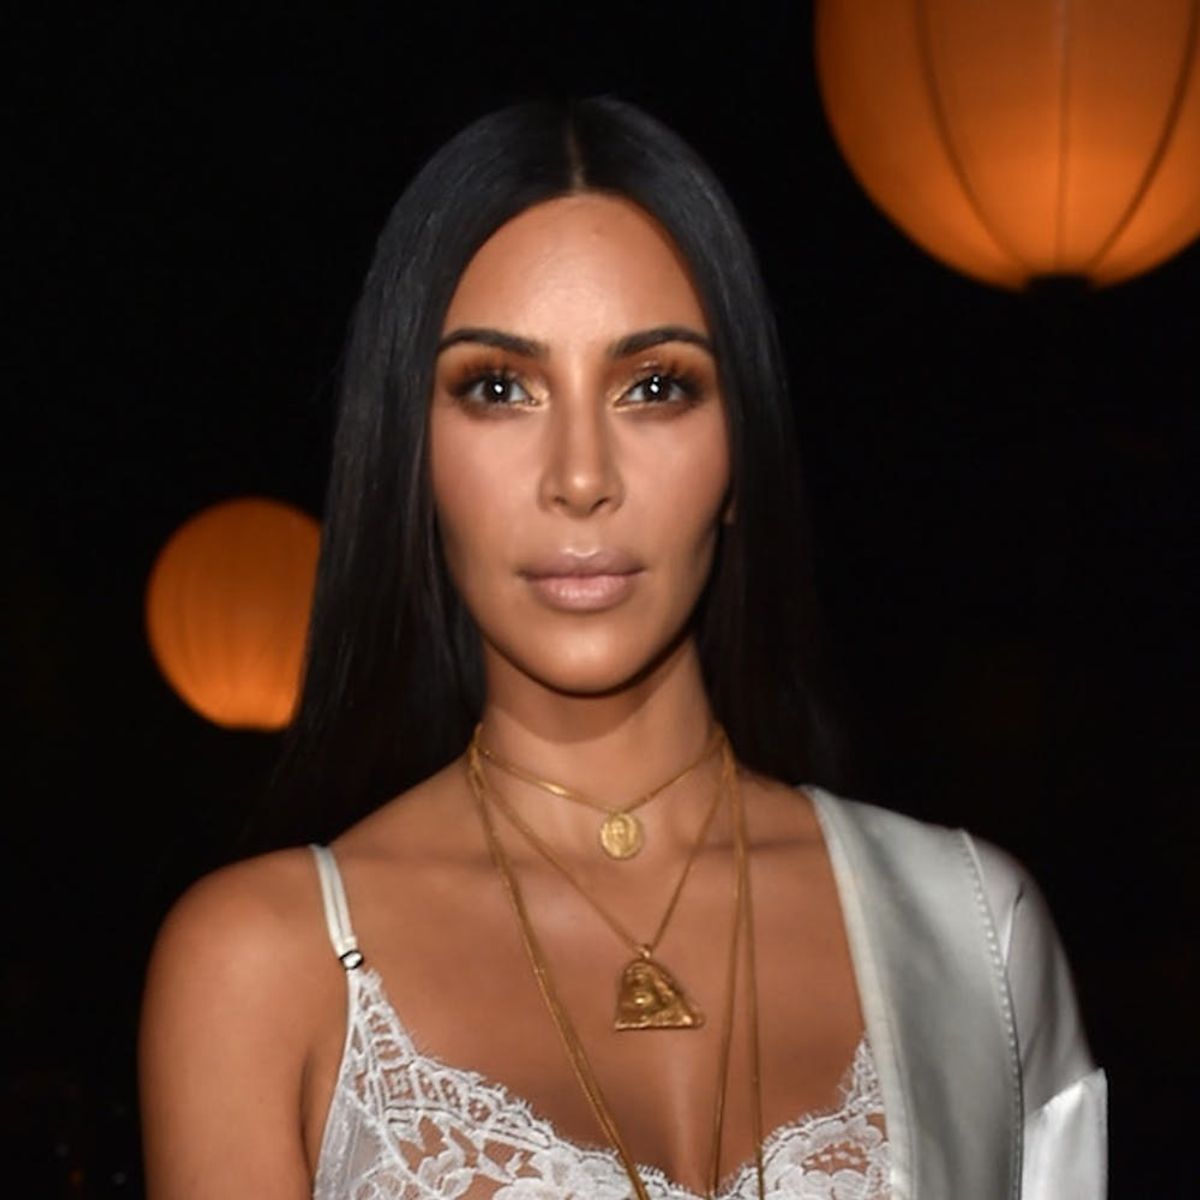 Morning Buzz: New Details from Kim Kardashian’s Hotel Concierge Reveal Her Robbers Were NOT There for Her Jewelry + More